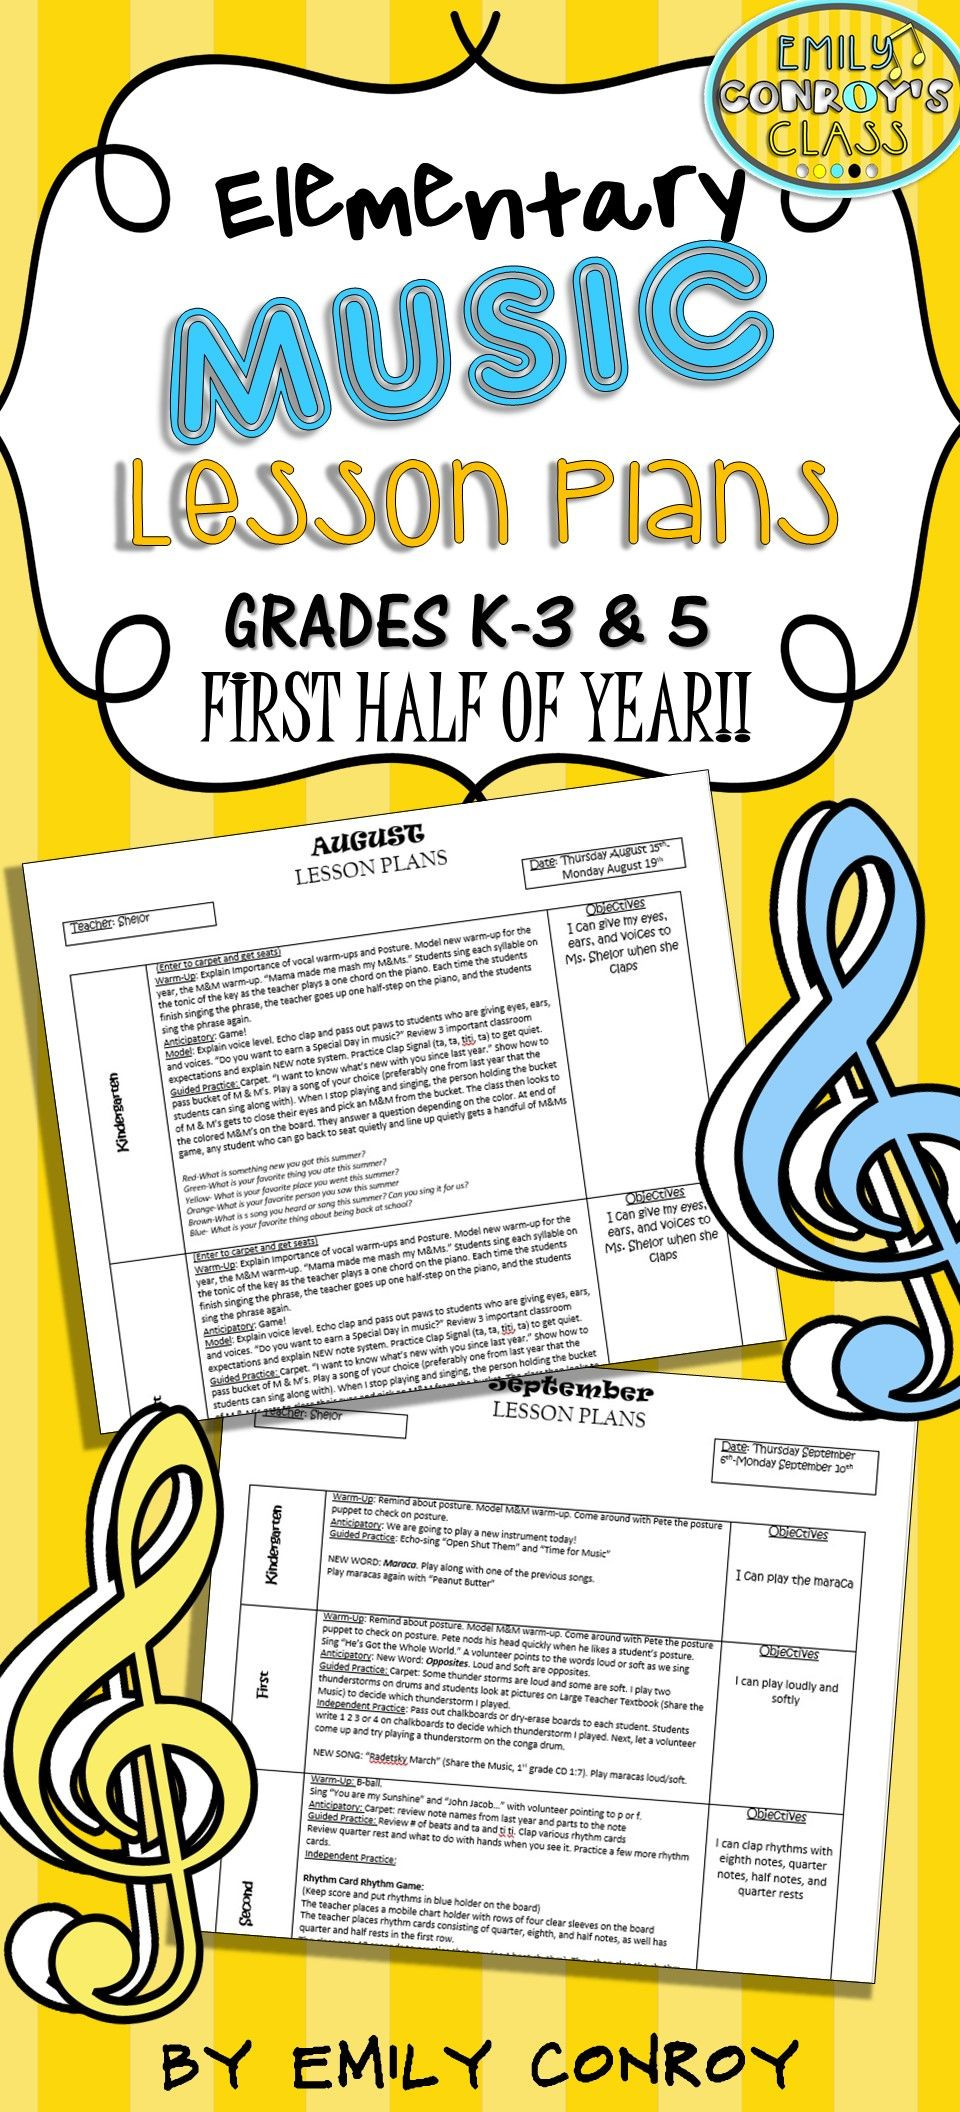 Music Lesson Plans Elementary Music Lessons Plans these Plans are Creative